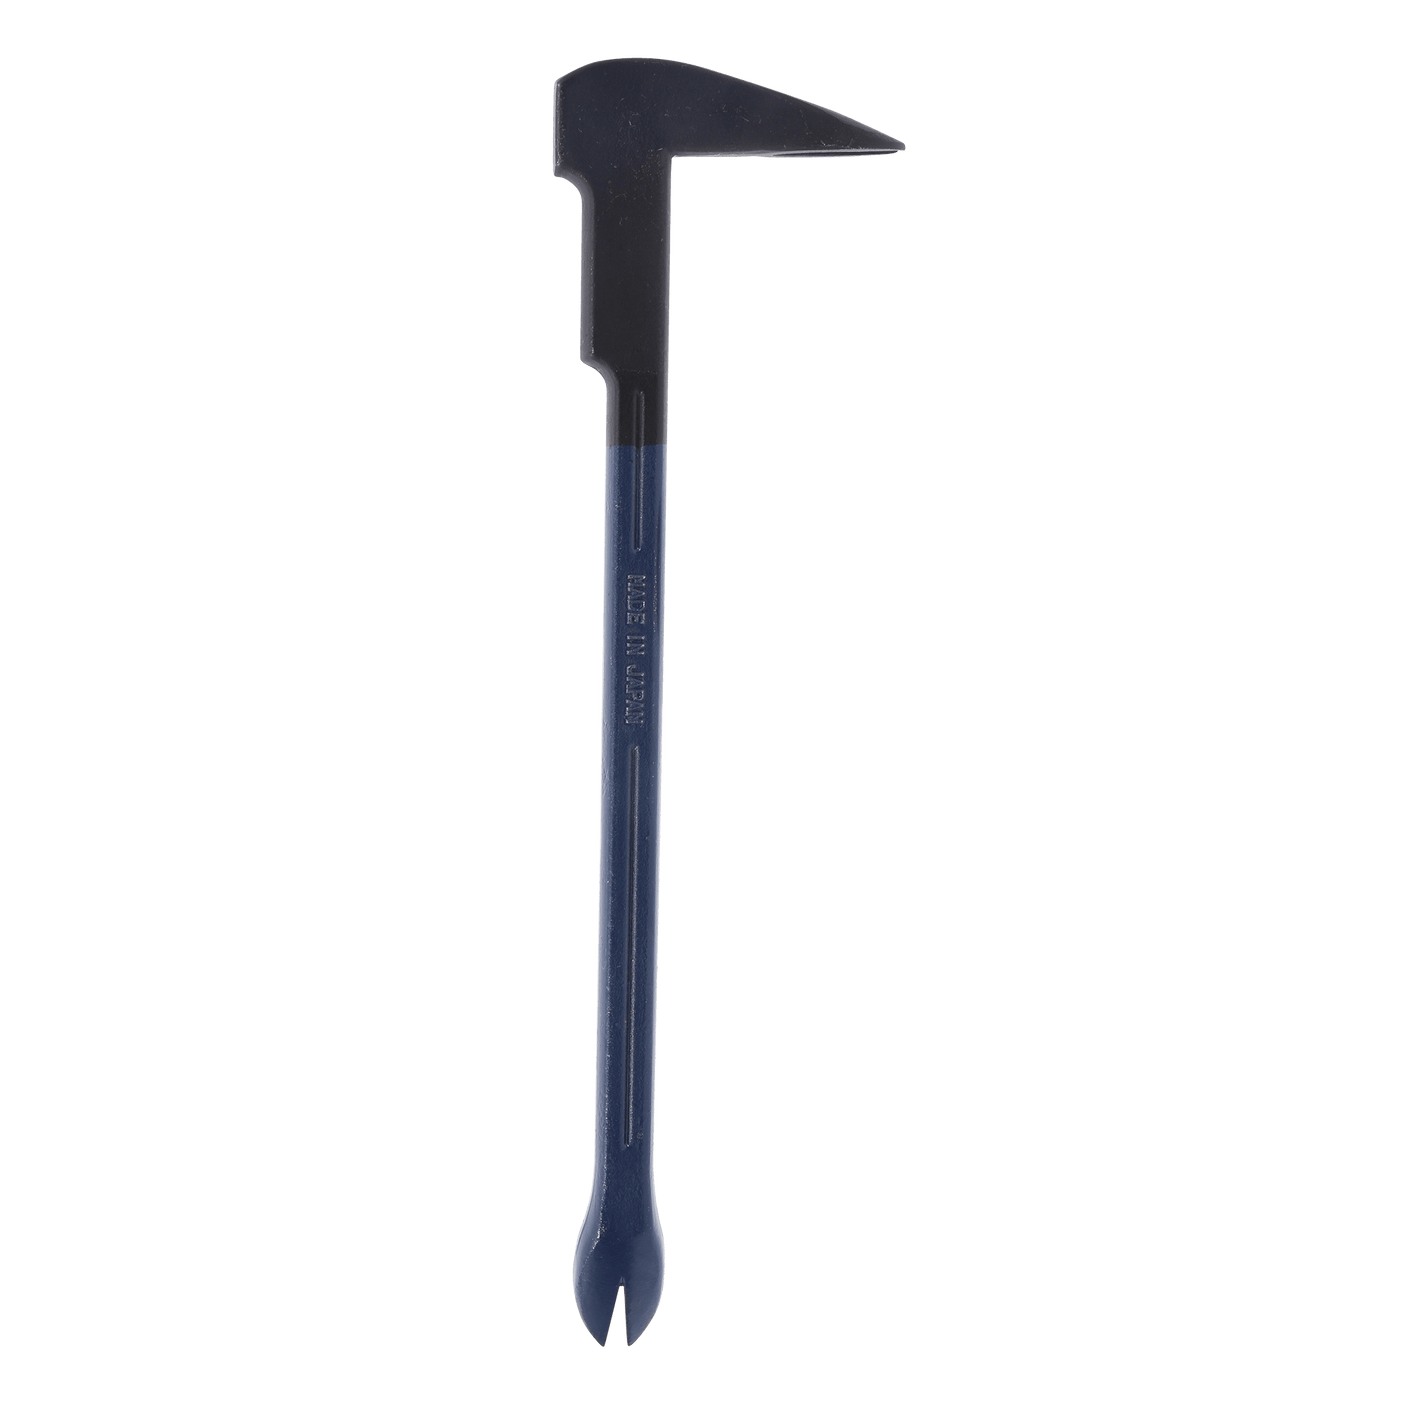 Demolition Pry Bar and Nail Puller - Hammers - Japanese Tools Australia